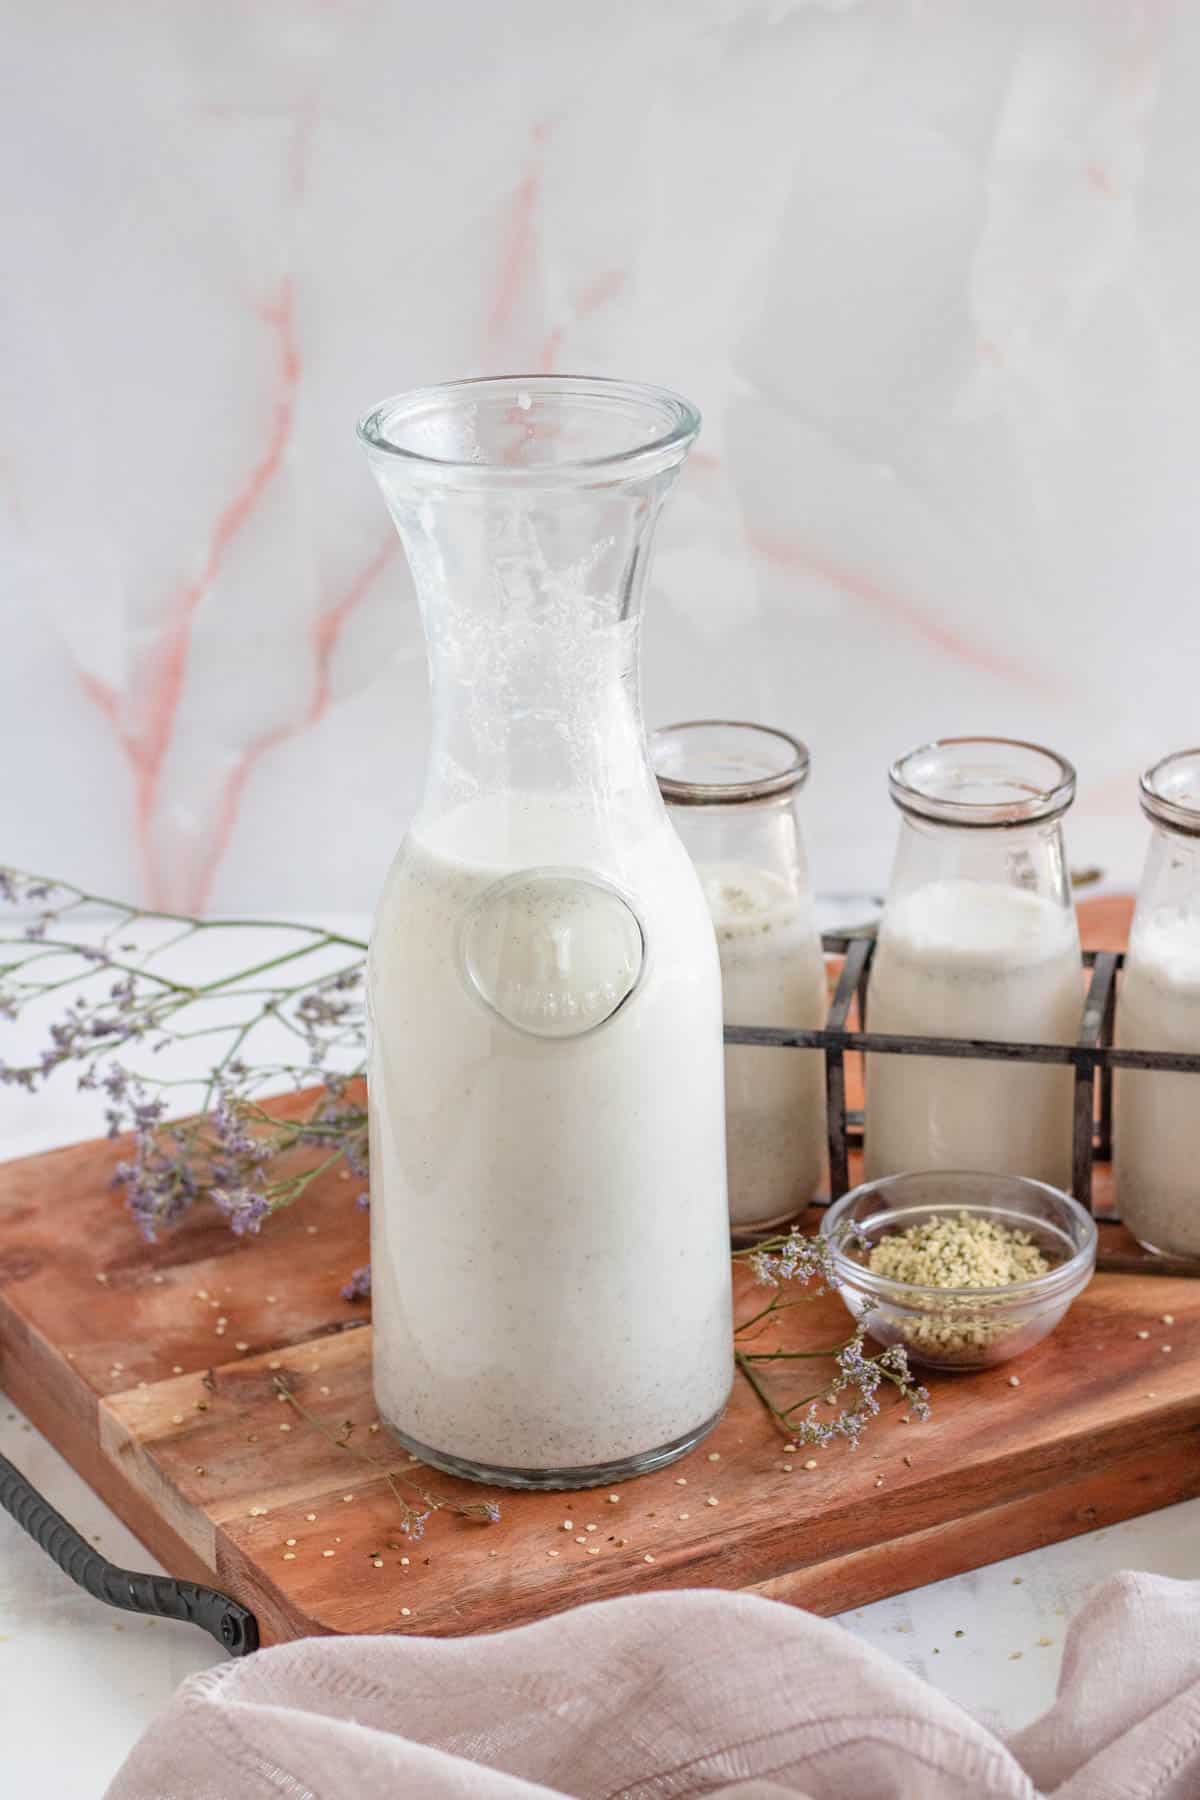 hemp milk recipe in a tall glass on a wooden cutting board with a light colored background